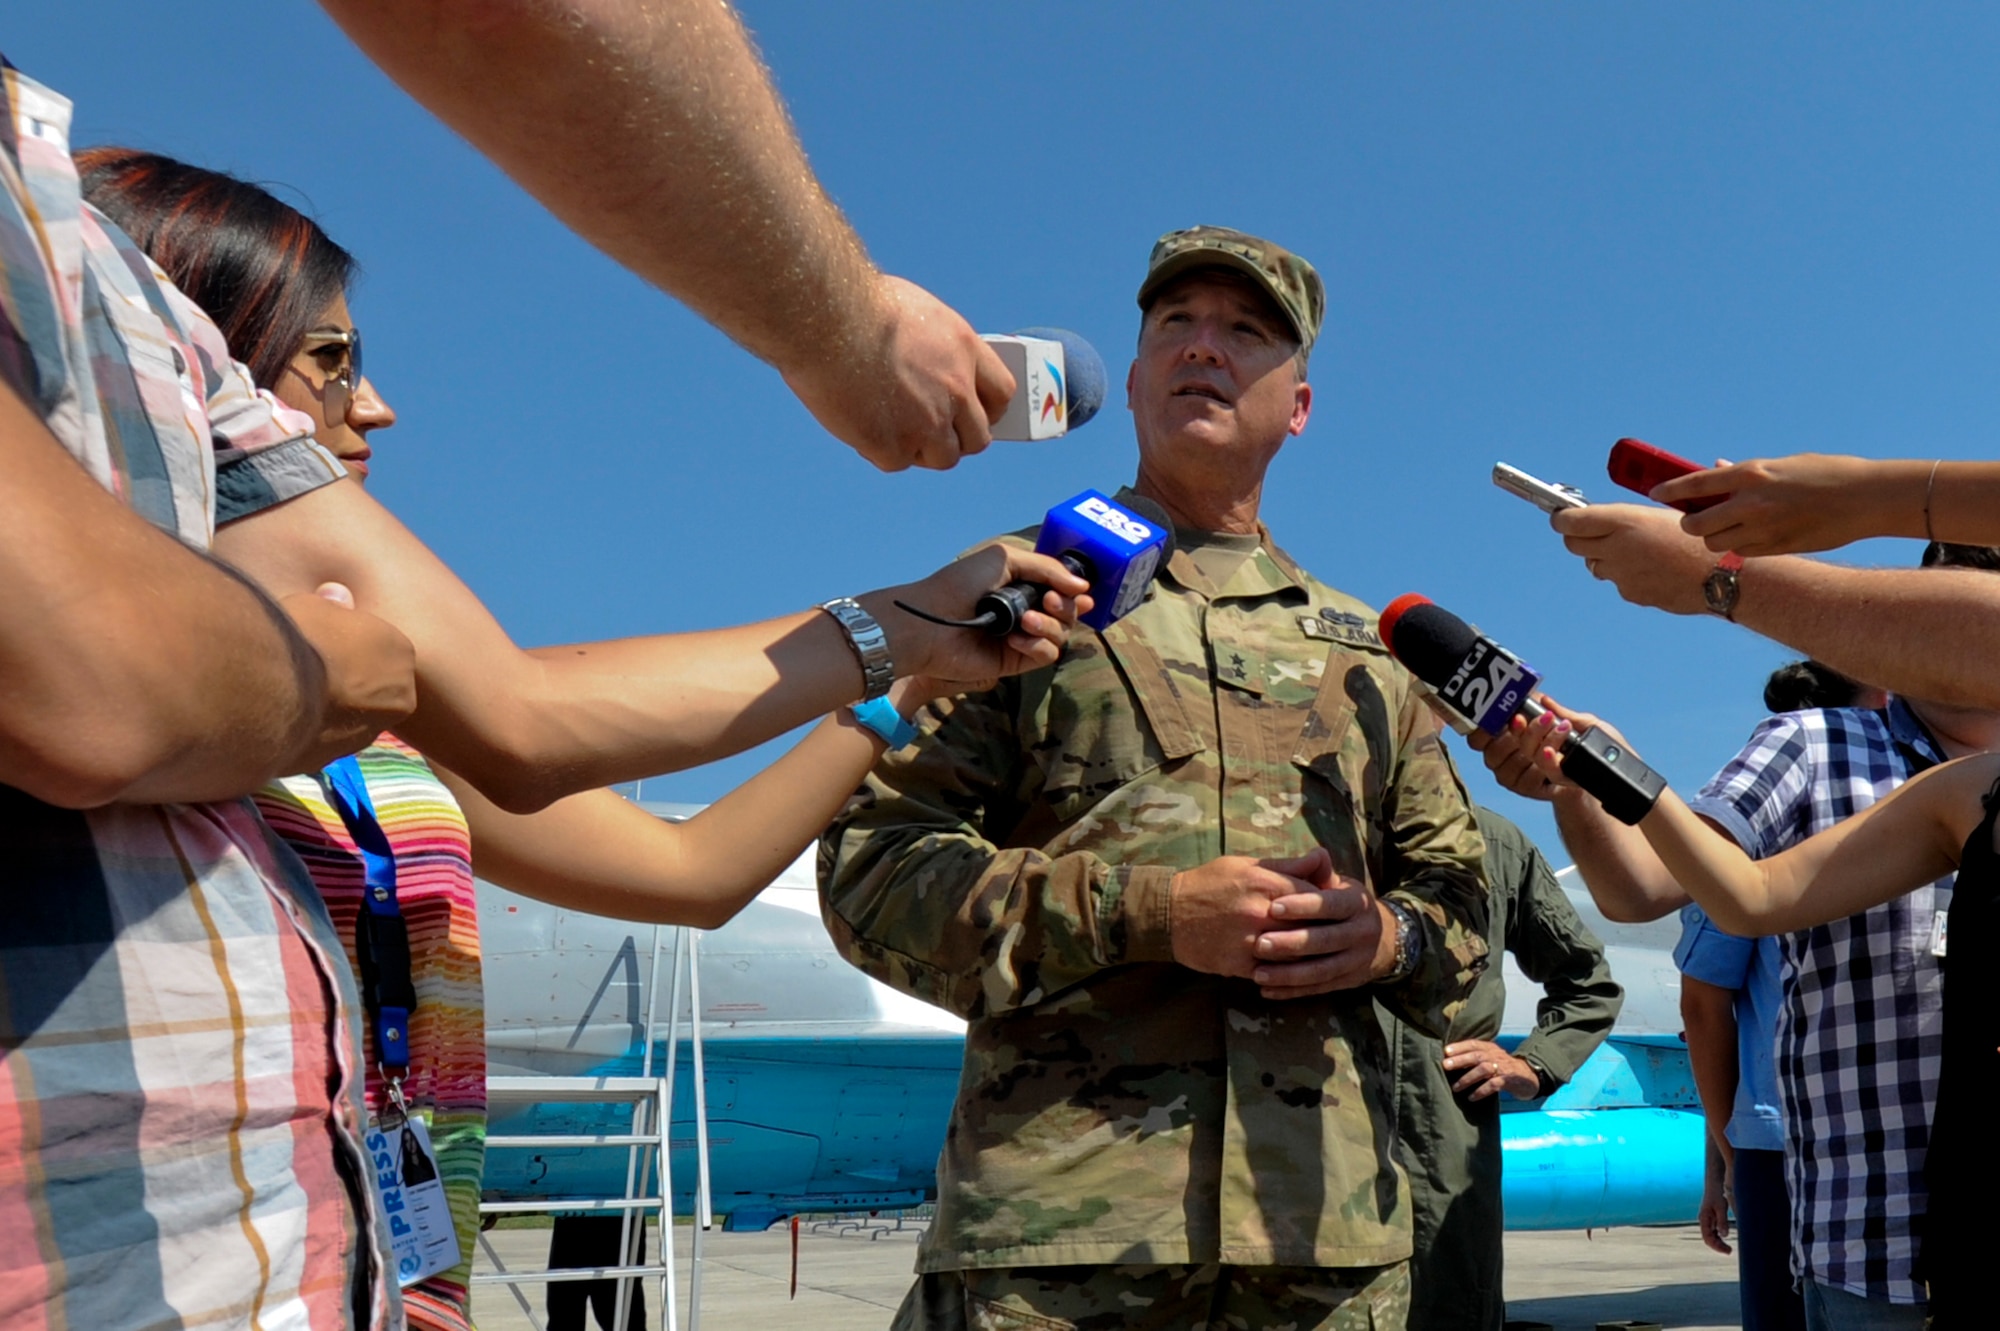 California Army National Guard Maj. Gen. Matthew Beevers, deputy adjutant general of the California Military Department, smiles answers reporters' questions during the Romanian air force's 71st Air Base's air show and open house at Campia Turzii, Romania, July 23, 2016. The aviation demonstration took place during the middle of the U.S. Air Force's 194th Expeditionary Fighter Squadron's six-month long theater security package deployment to Europe in support of Operation Atlantic Resolve, which aims to bolster the U.S.'s continued commitment to the collective security of NATO and dedication to the enduring peace and stability in the region. The unit, comprised of more than 200 CANG Airmen from the 144th Fighter Wing at Fresno ANG Base, Calif., as well as U.S. Air Force Airmen from the 52nd Fighter Wing at Spangdahlem Air Base, Germany, piloted, maintained and supported the deployment of 12 F-15Cs Eagle fighter aircraft throughout nations like Romania, Iceland, the United Kingdom, the Netherlands, Estonia and among others. The F-15Cs took to the skies alongside the 71st AB's MiG-21 fighter aircraft and Puma helicopters for both the airshow, the second engagement of its kind at Campia Turzii under Operation Atlantic Resolve, and the bilateral flight training, also known as Dacian Eagle 2016. (U.S. Air Force photo by Staff Sgt. Joe W. McFadden/Released)